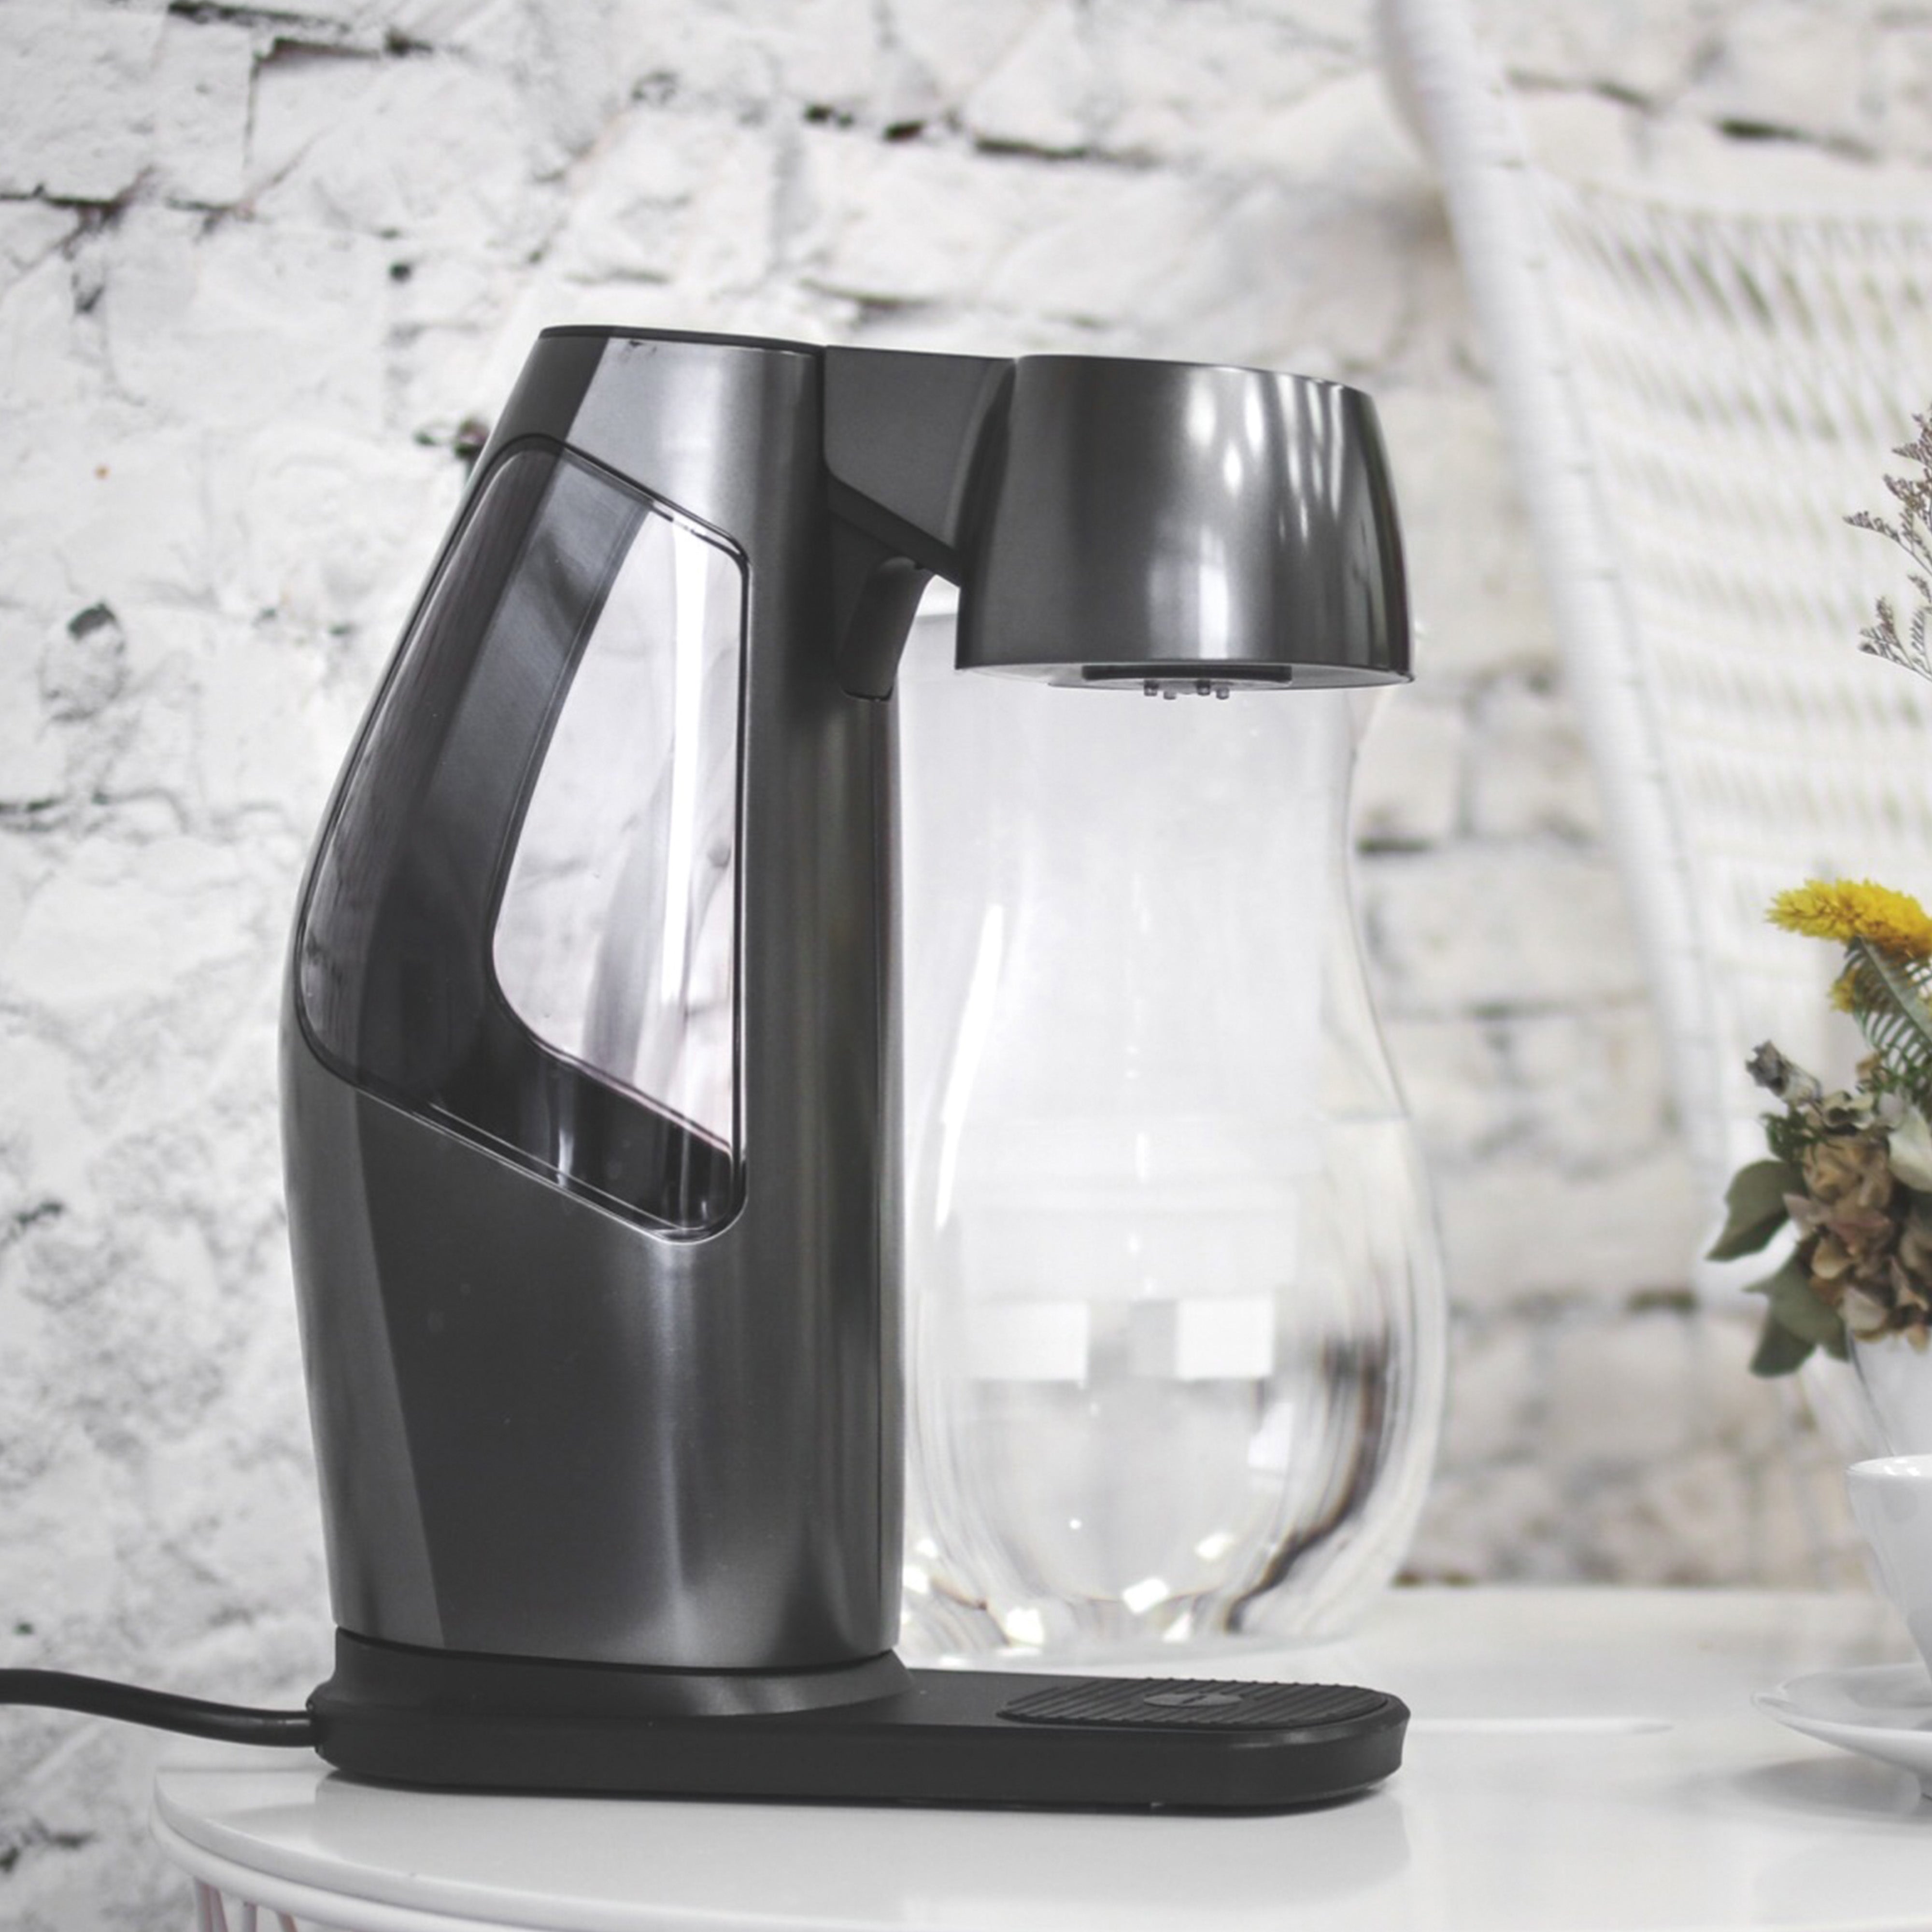 Hiroia Plans to Bring the Samantha Automated Pourover Brewer to